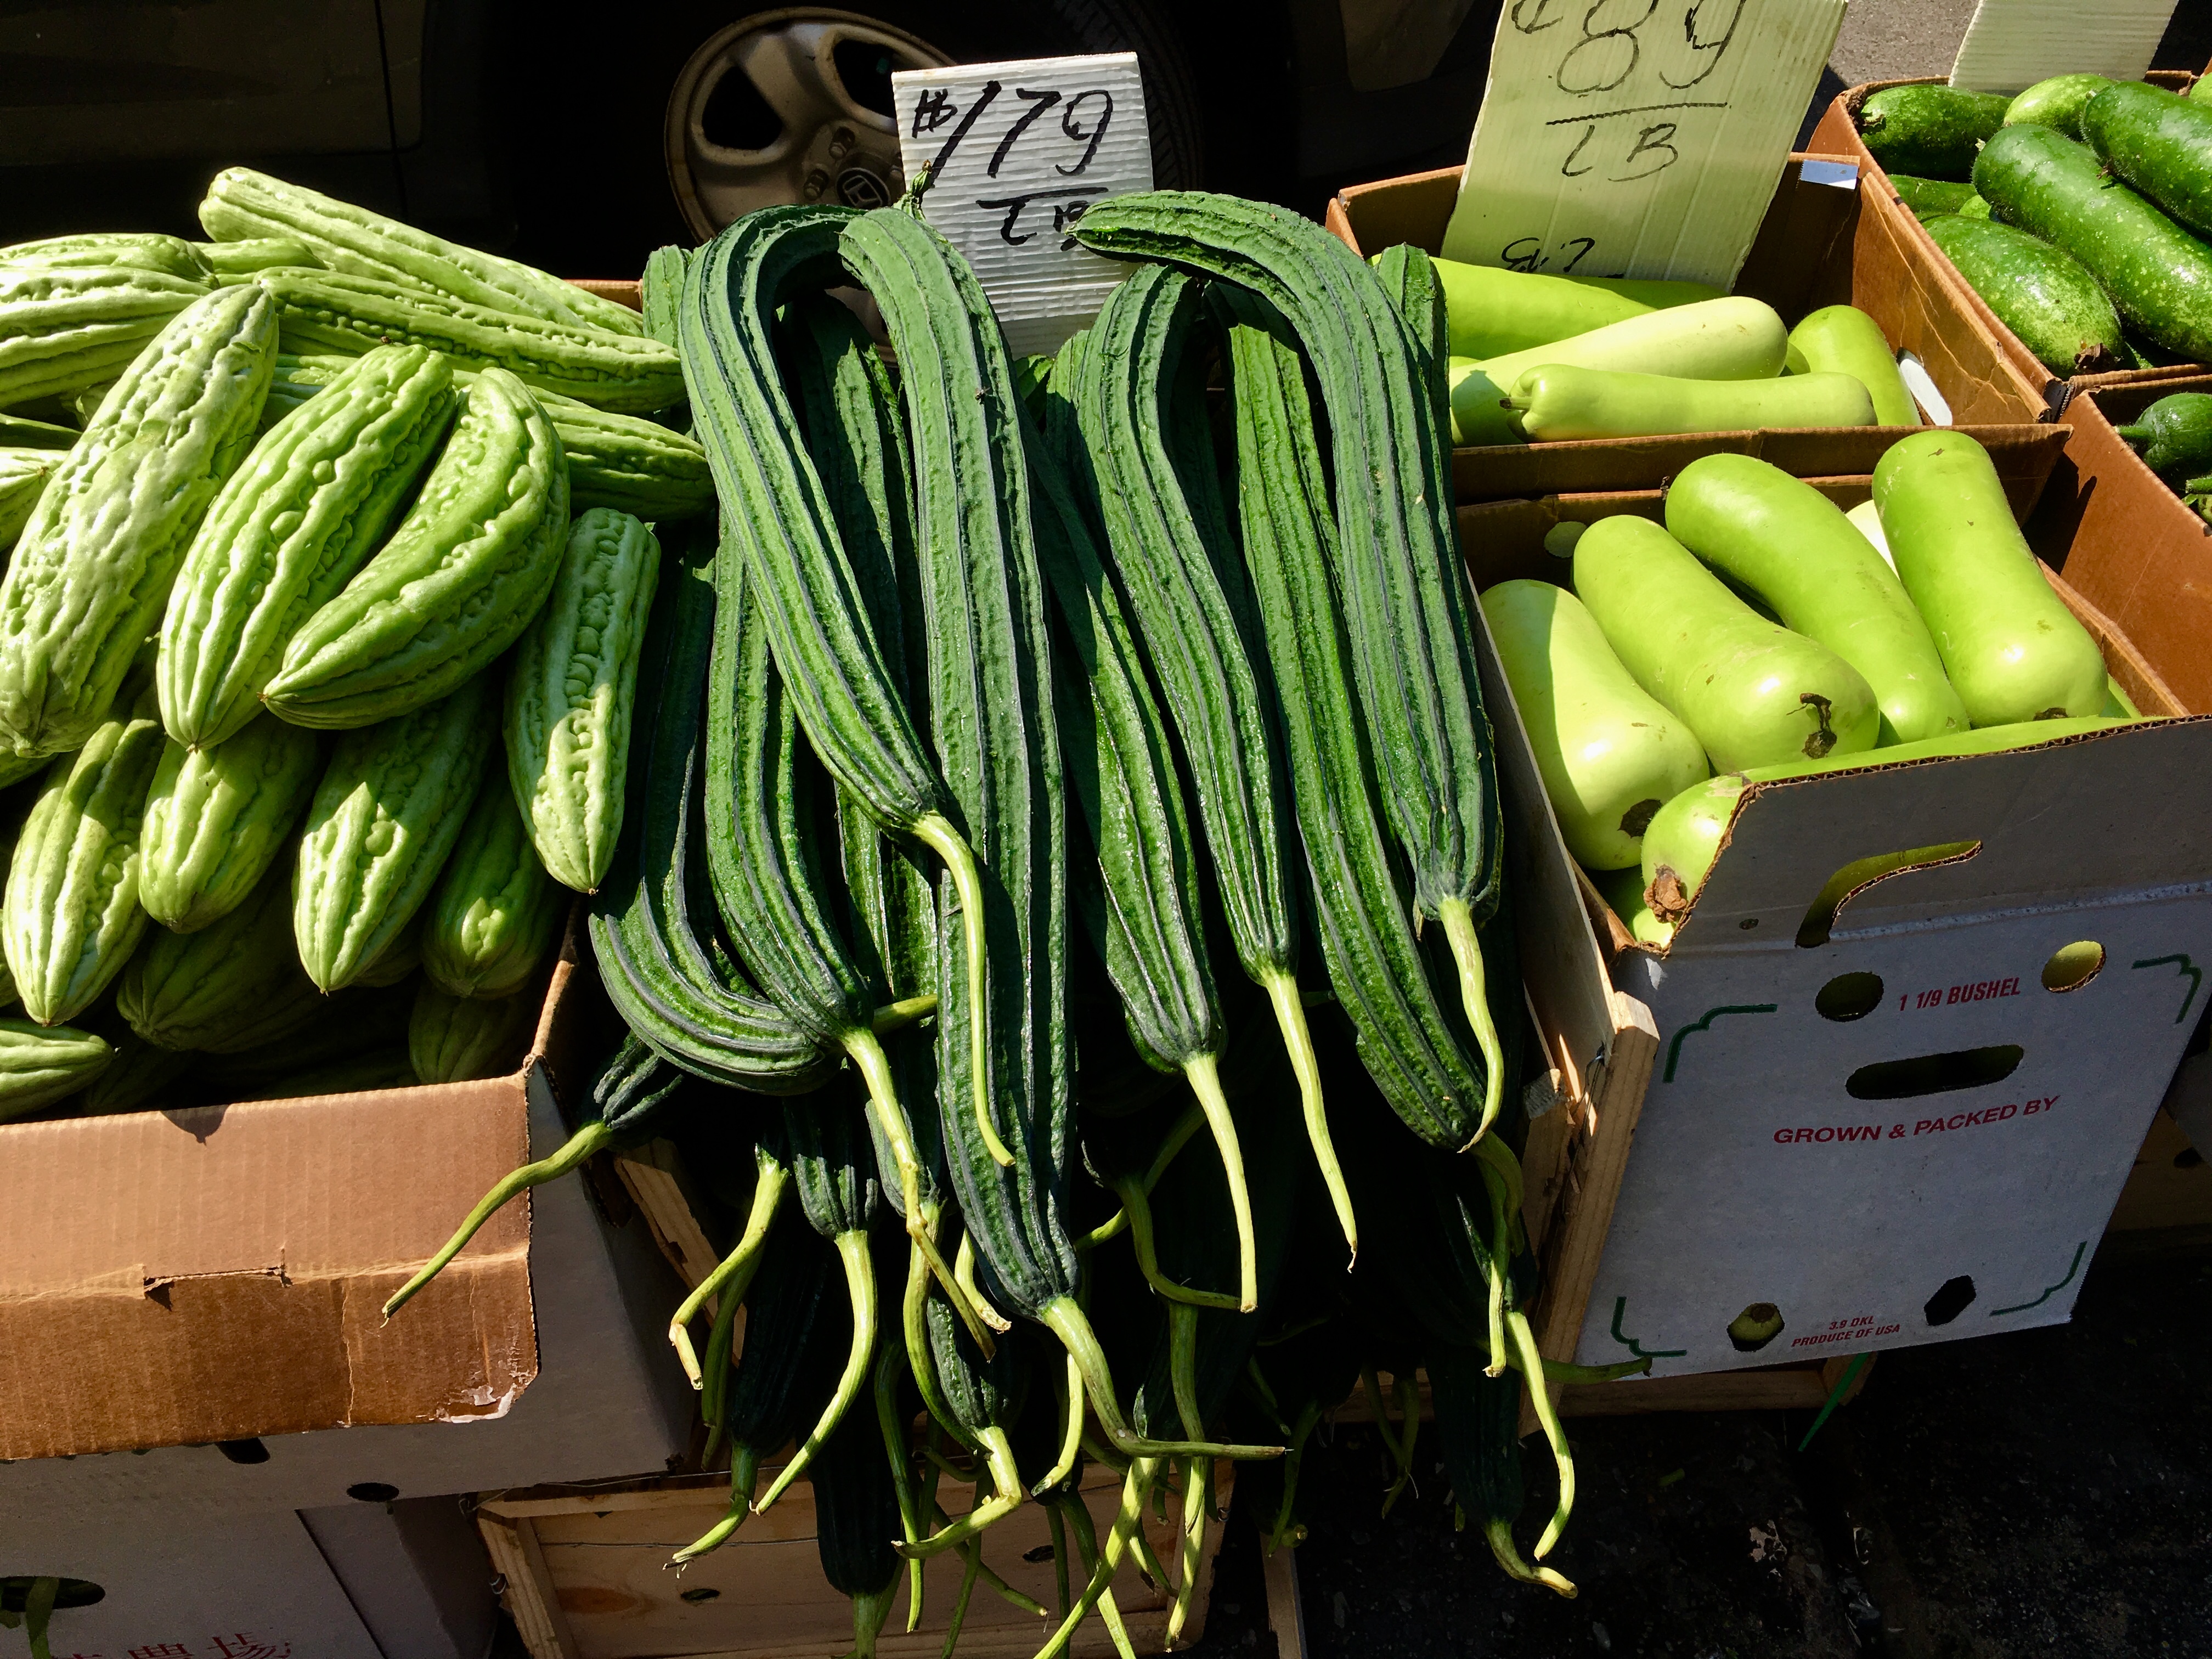 This long skinny vegetable, which is probably Chinese okra, can be found at New Zhong Hua Market. Eagle photo by Lore Croghan